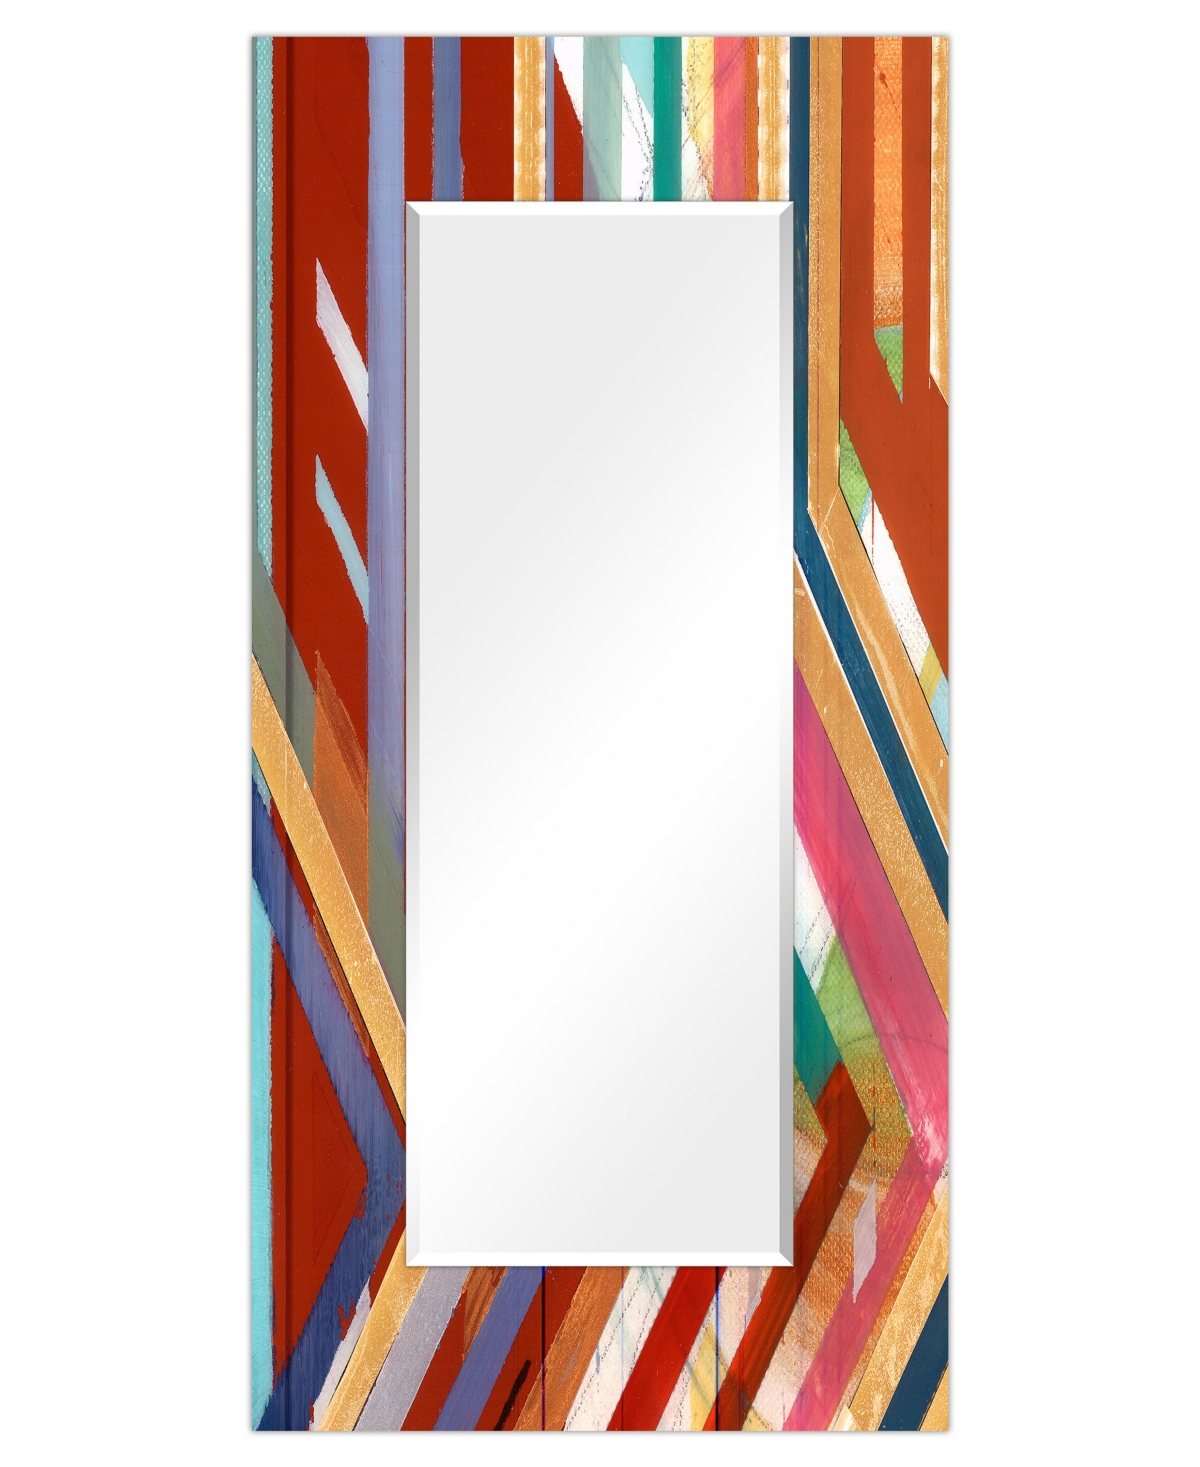 Empire Art Direct "lineal Color" Rectangular Beveled Mirror On Free Floating Printed Tempered Art Glass, 72" X 36" X 0 In Multi-color